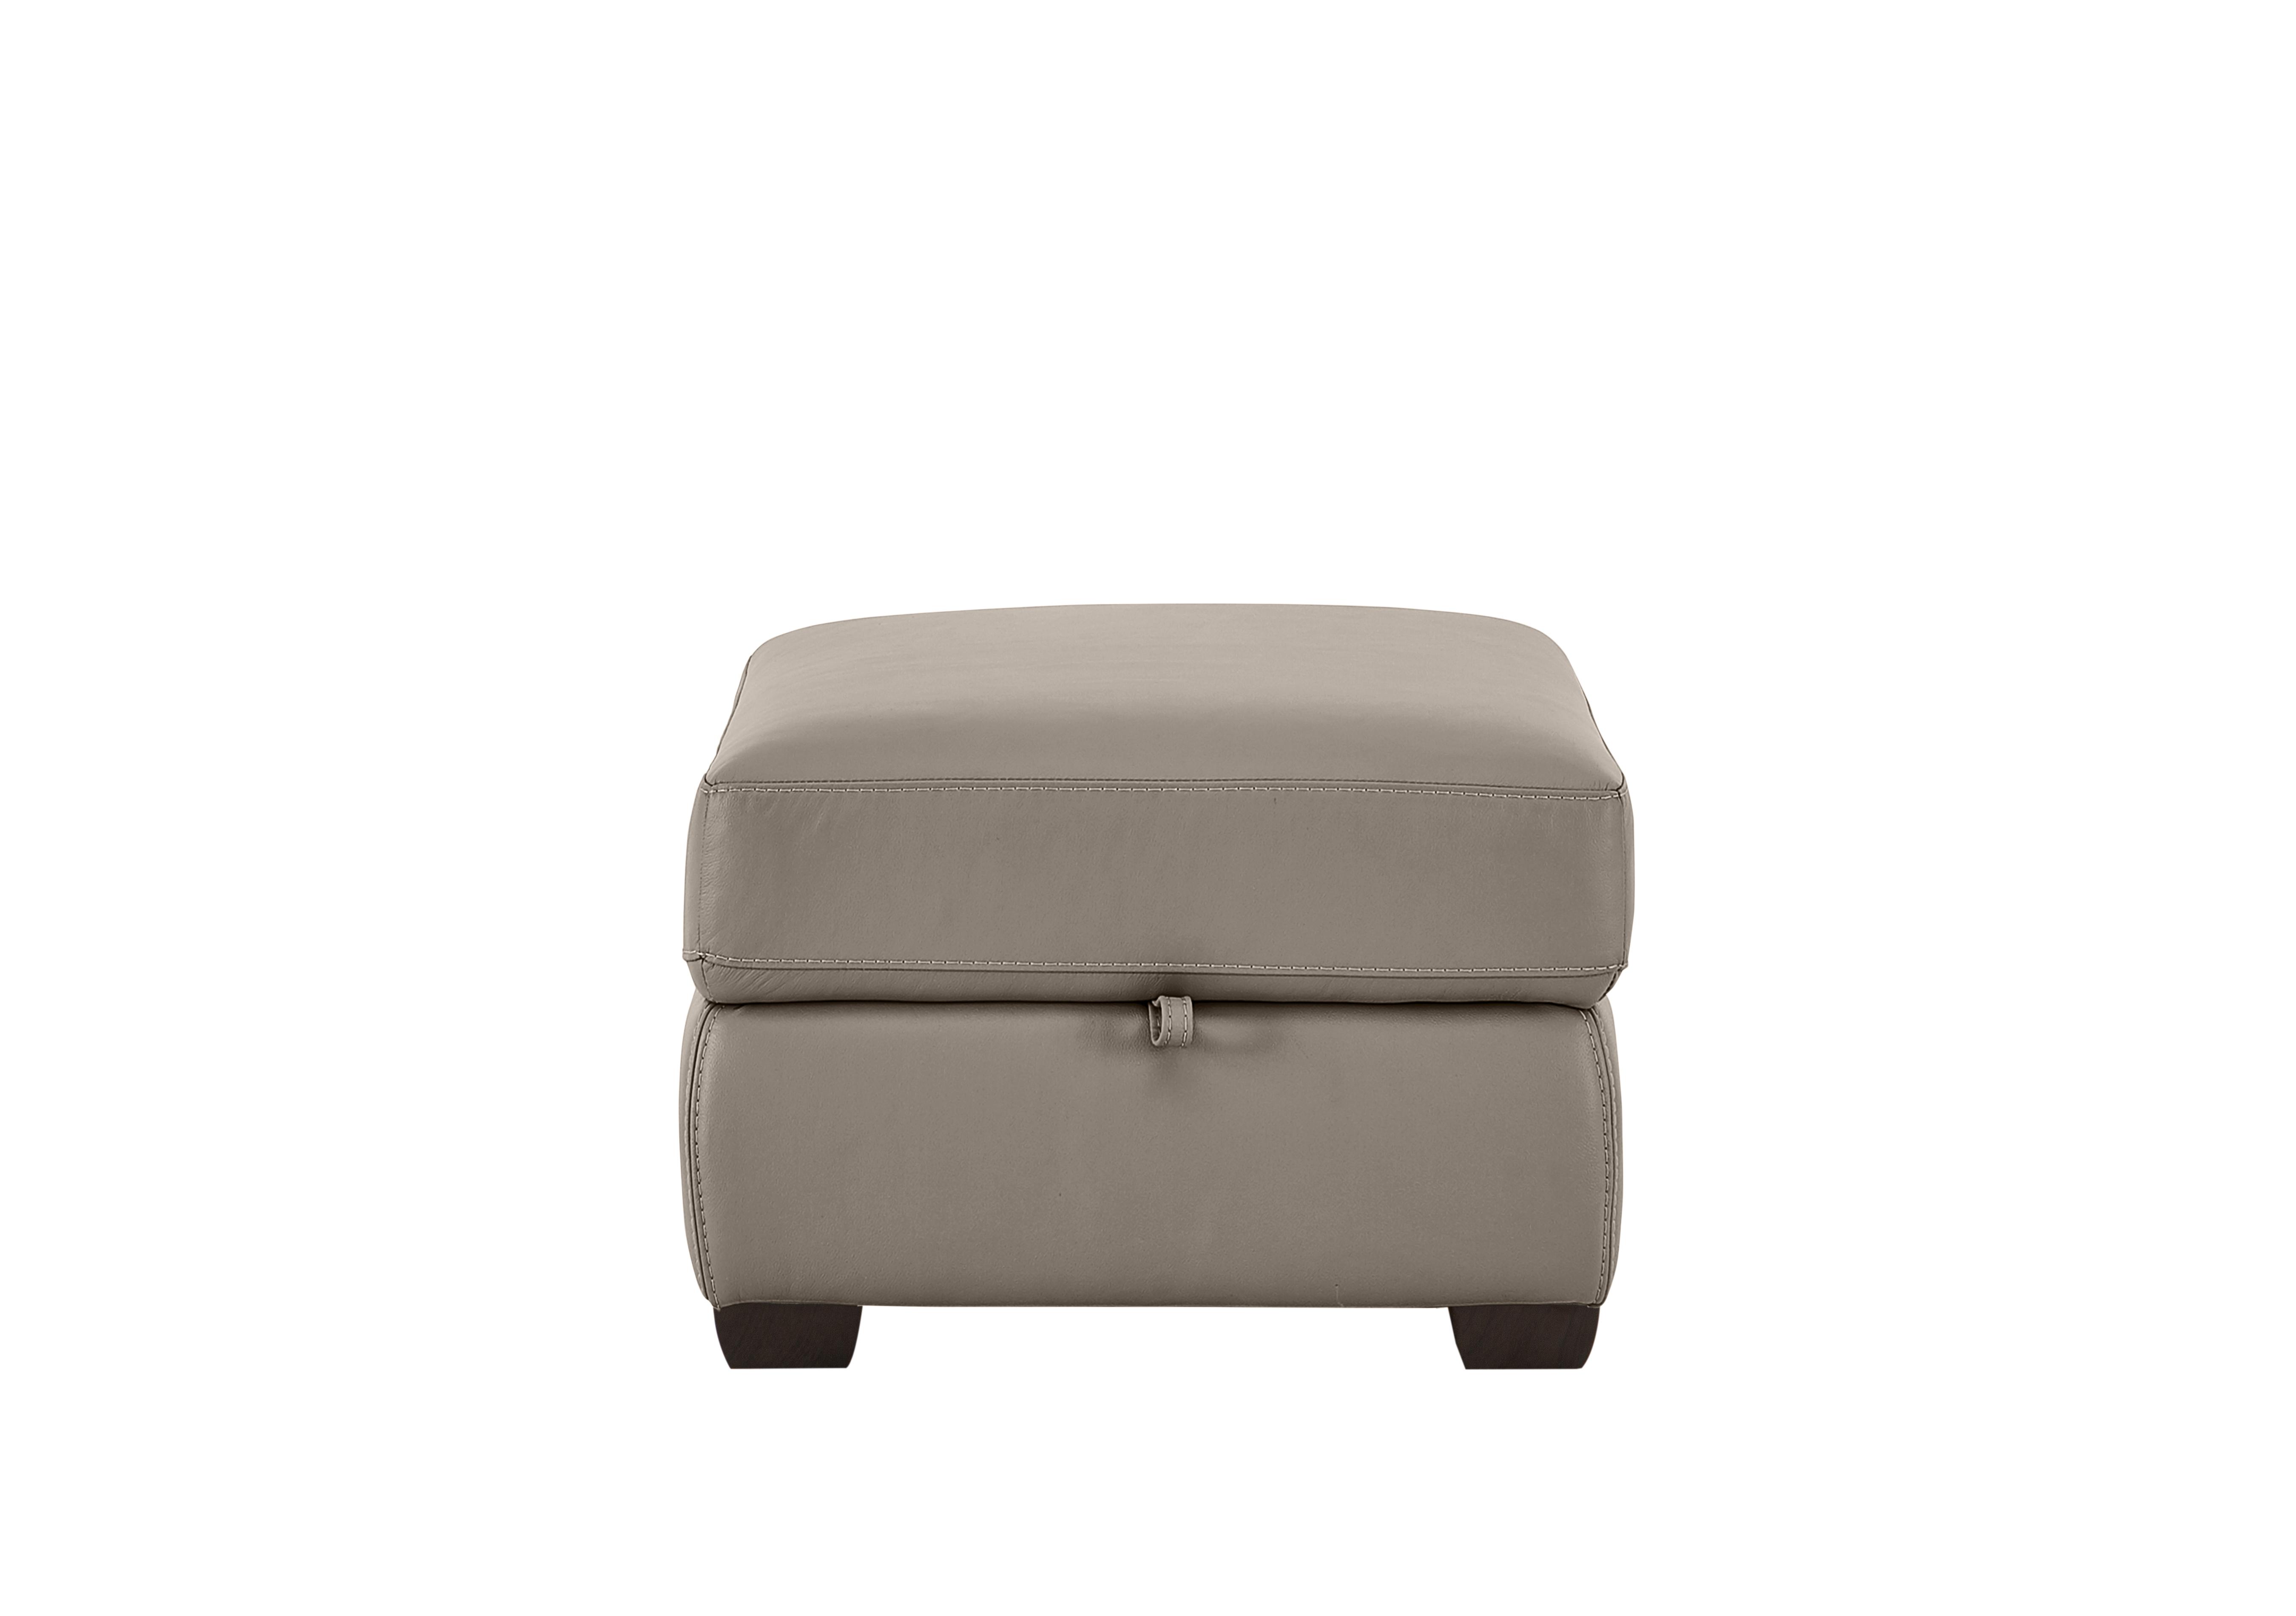 Chicago Leather Storage Stool in An-946b Silver Grey on Furniture Village